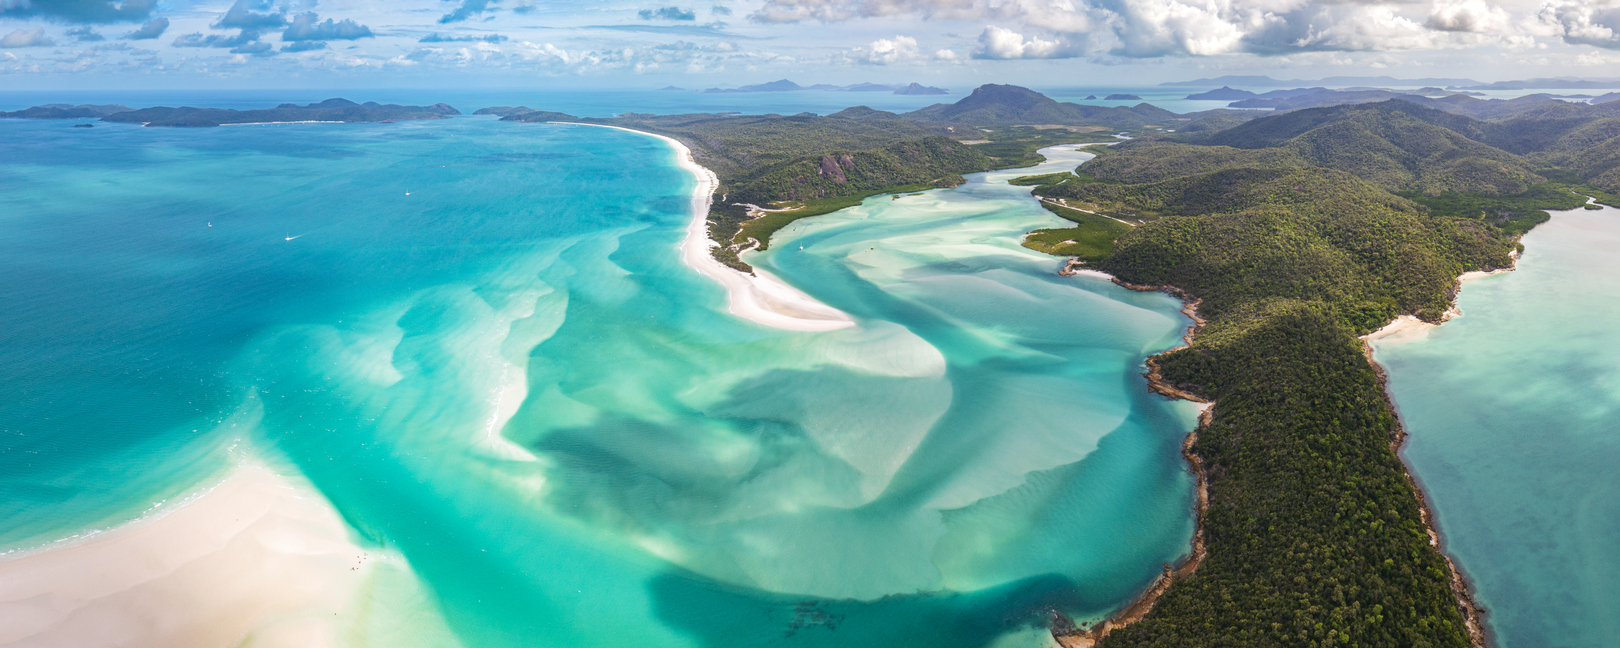 Panorama of Hill Inlet on a sunny day in Whitsundays Island in Great Barrier Reef, Australia